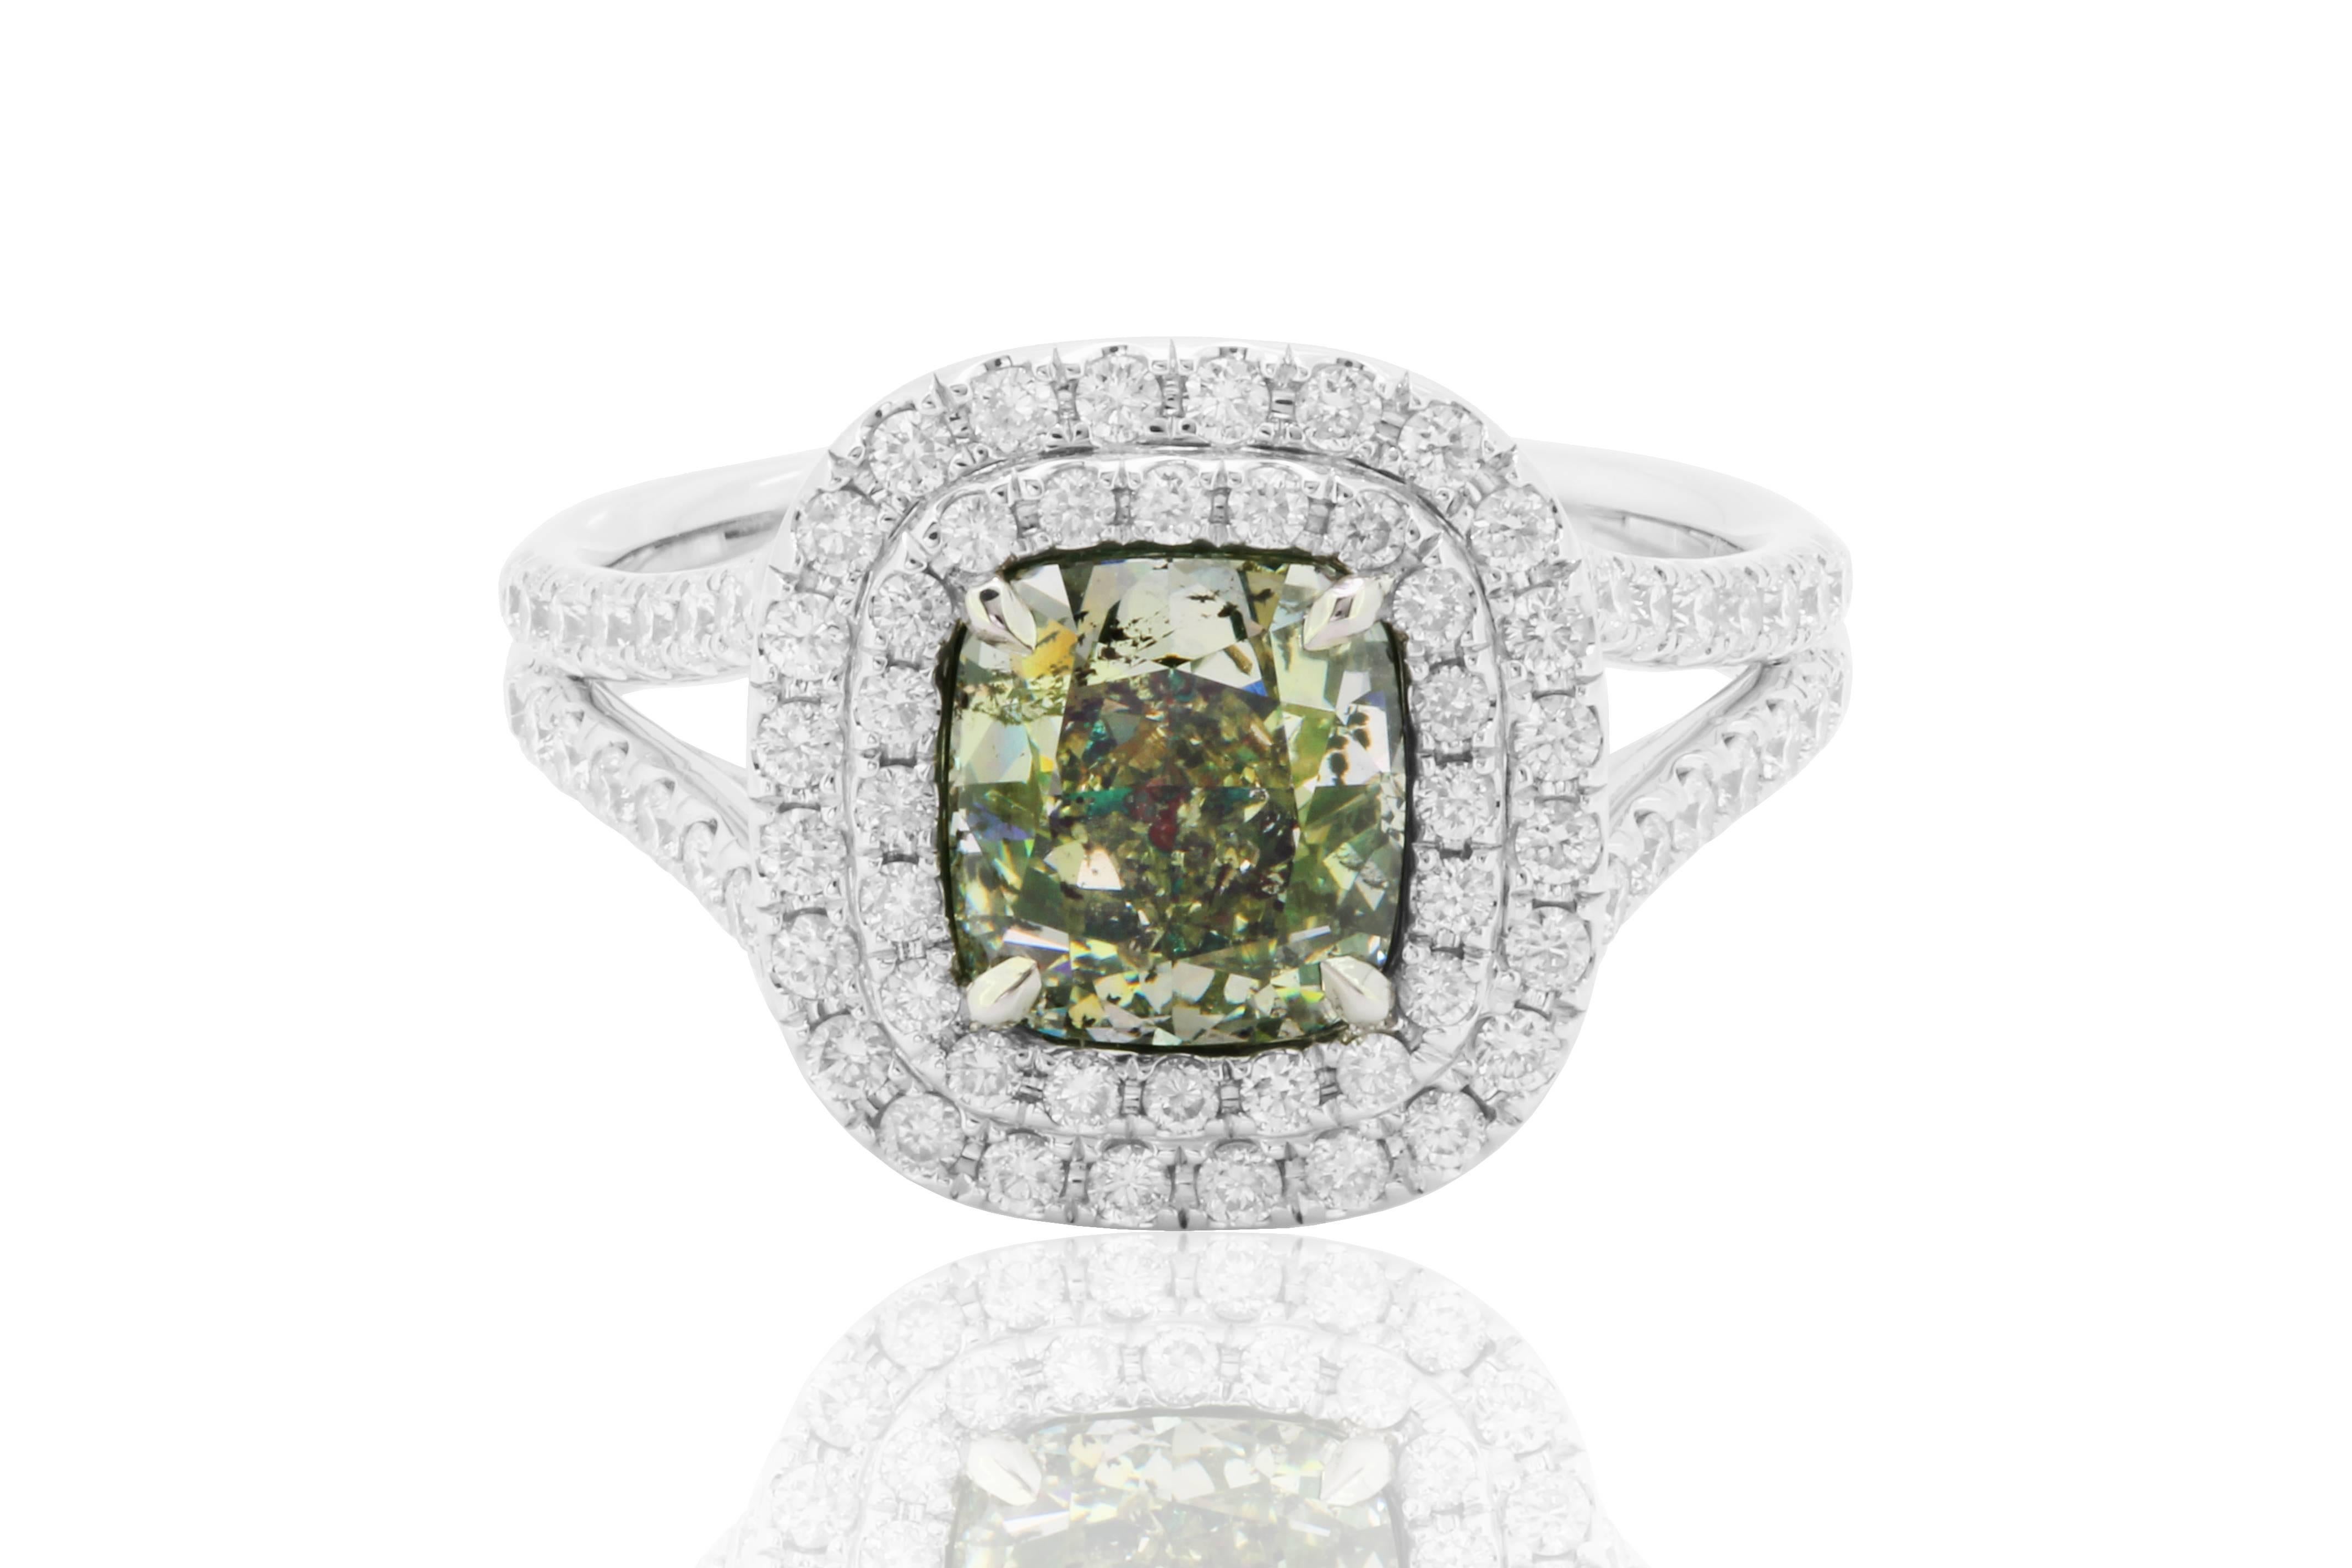 Very Rare GIA Certified Natural Fancy Grayish Yellowish Green Cushion Diamond 2.05 Carat Encircled in a Double Halo of White Diamond Rounds 0.61 Carat in a handmade 18K White Gold Ring.
MADE IN USA.
Total Diamond Weight 2.66 Carat